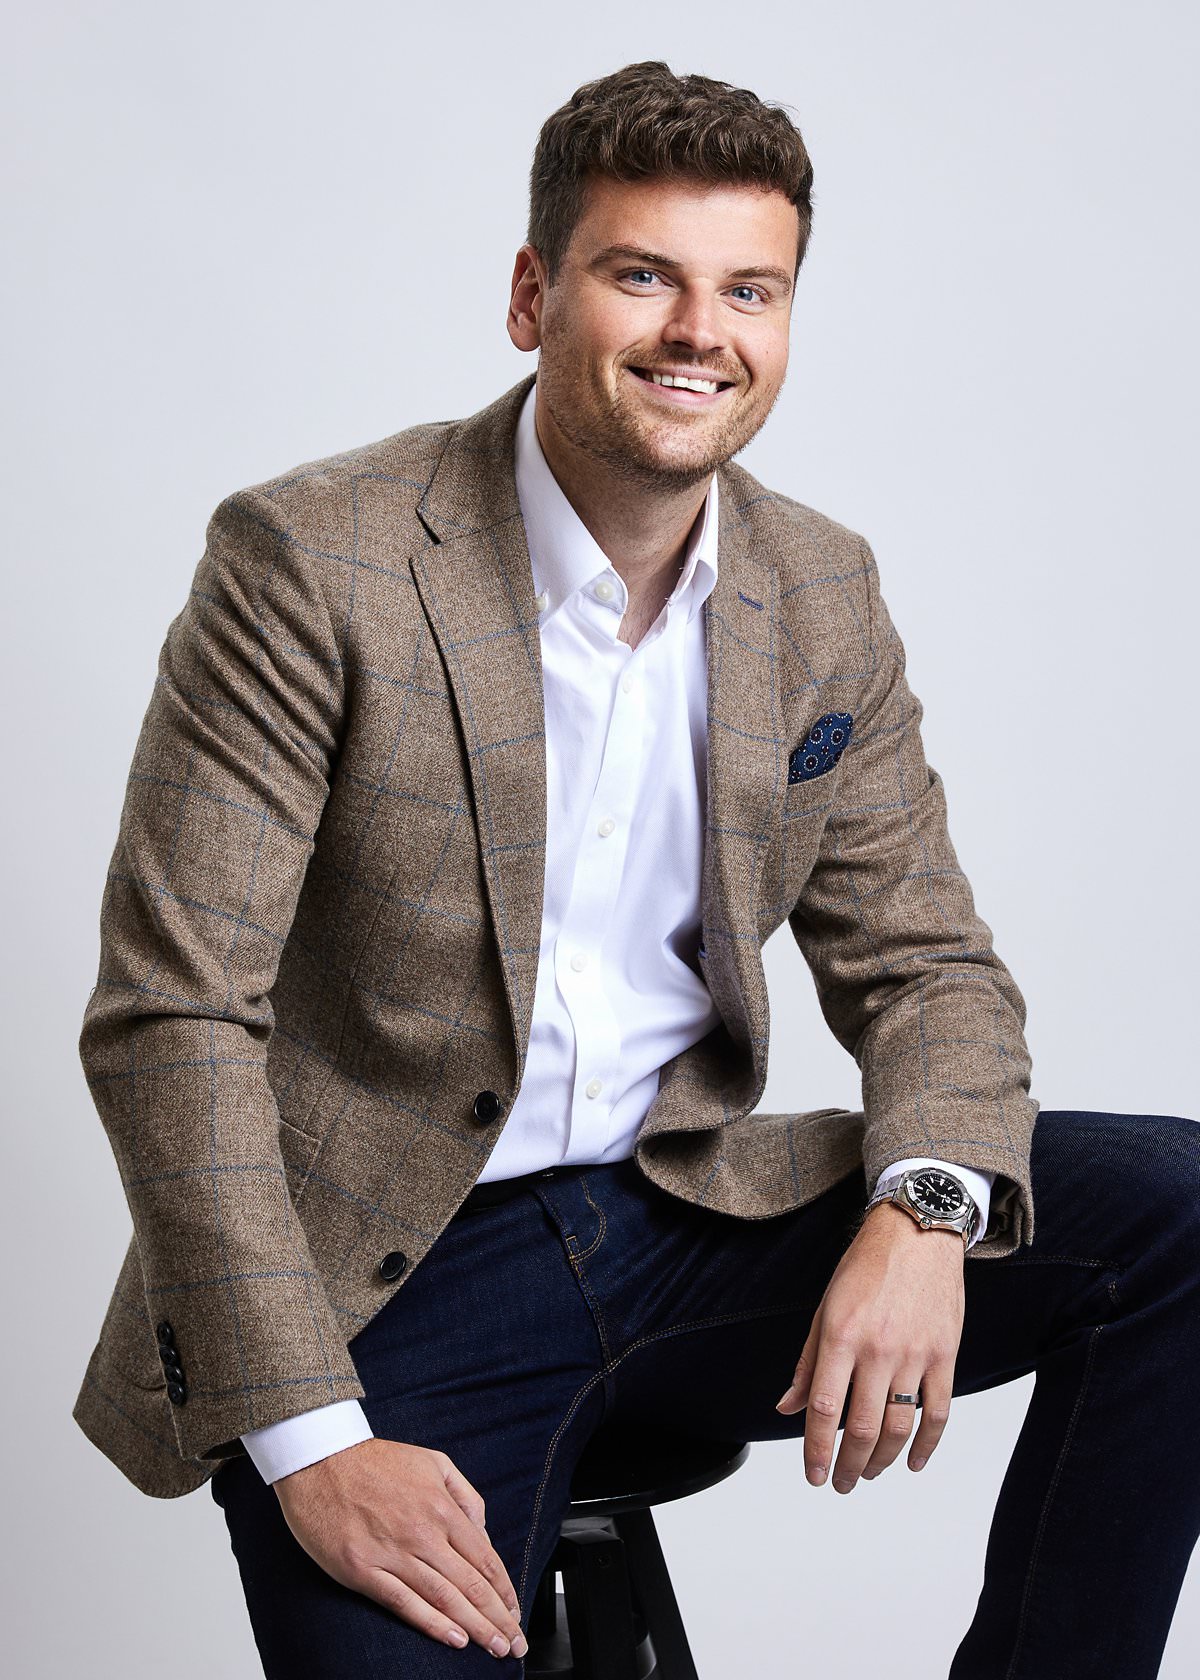 stylish business man branding portrait for marketing campaign by cardiff advertising photographer